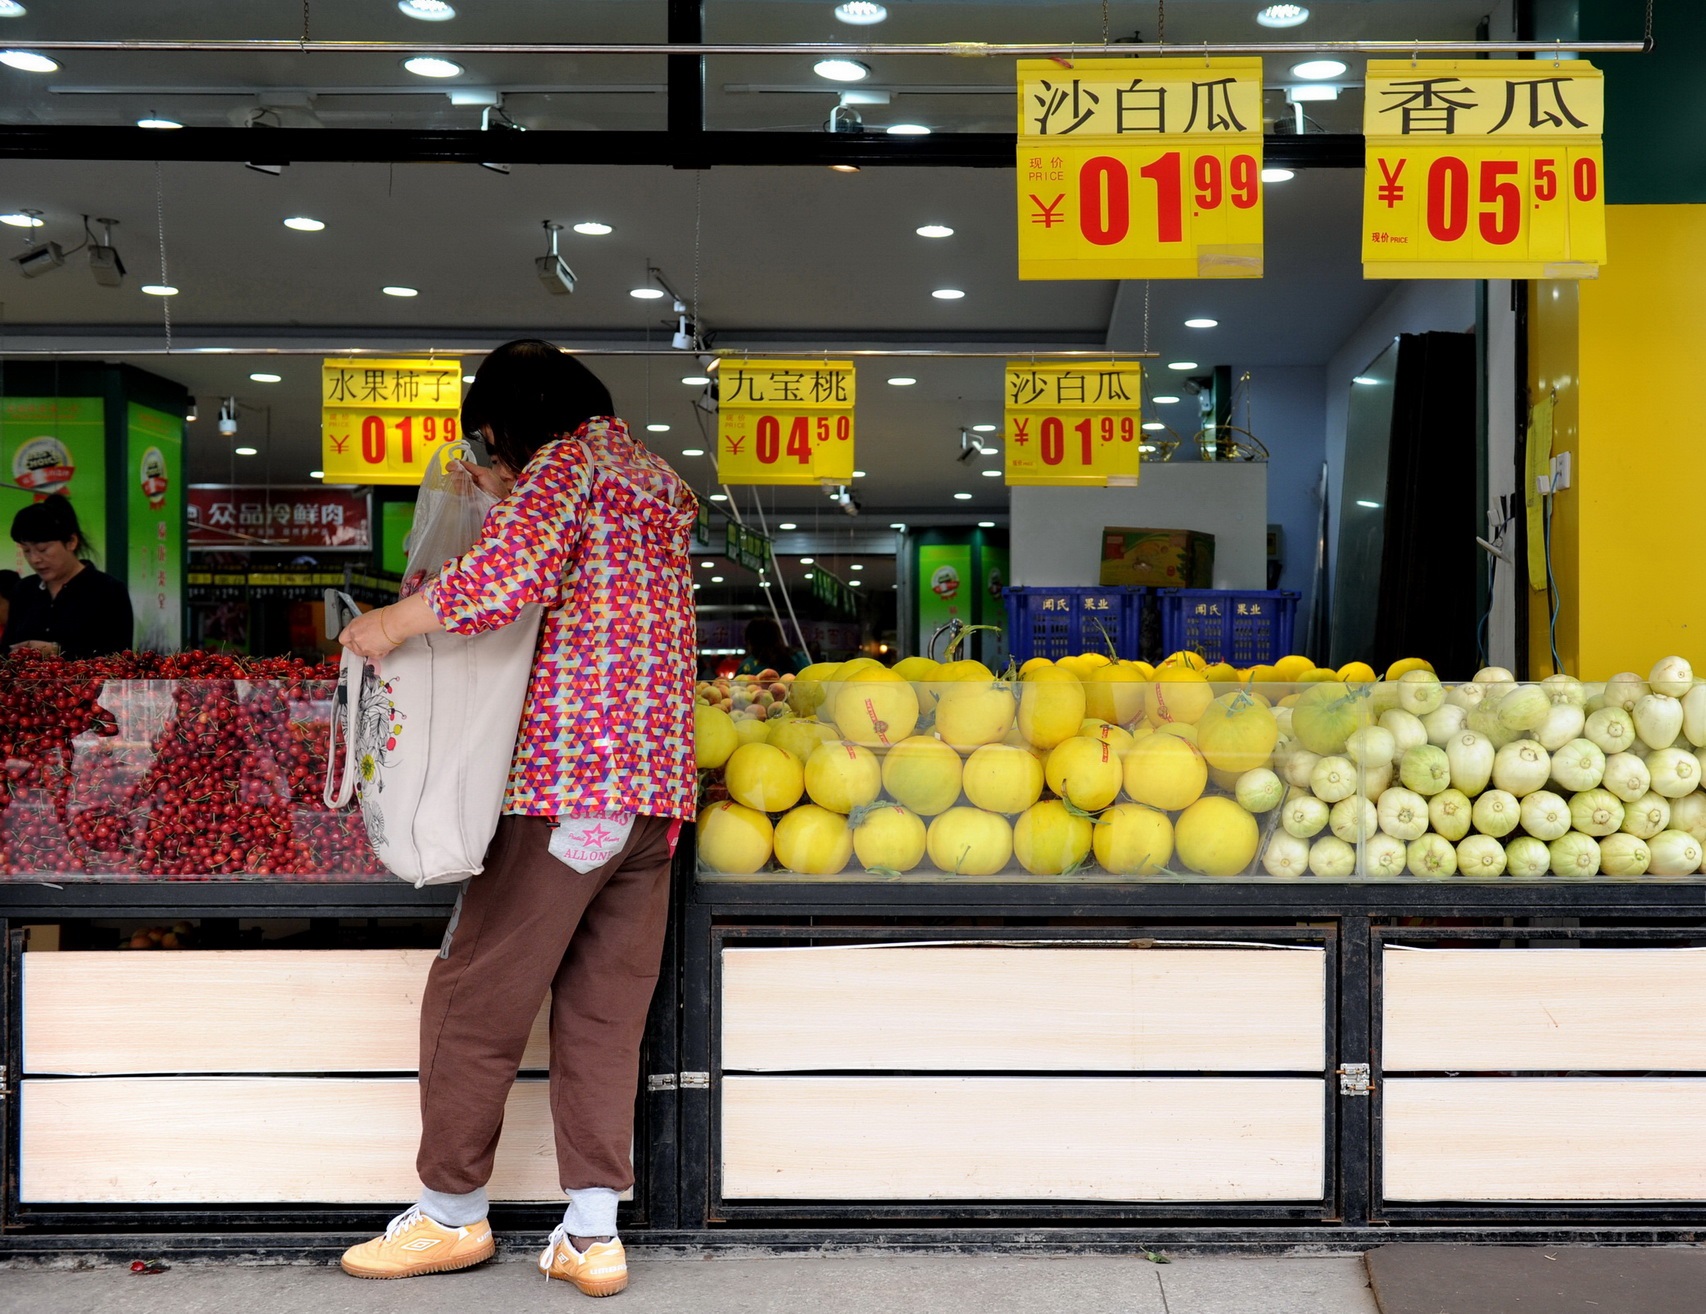 A surge in demand for fruit has led to produce from across the world being shipped to the mainland. Photo: Xinhua